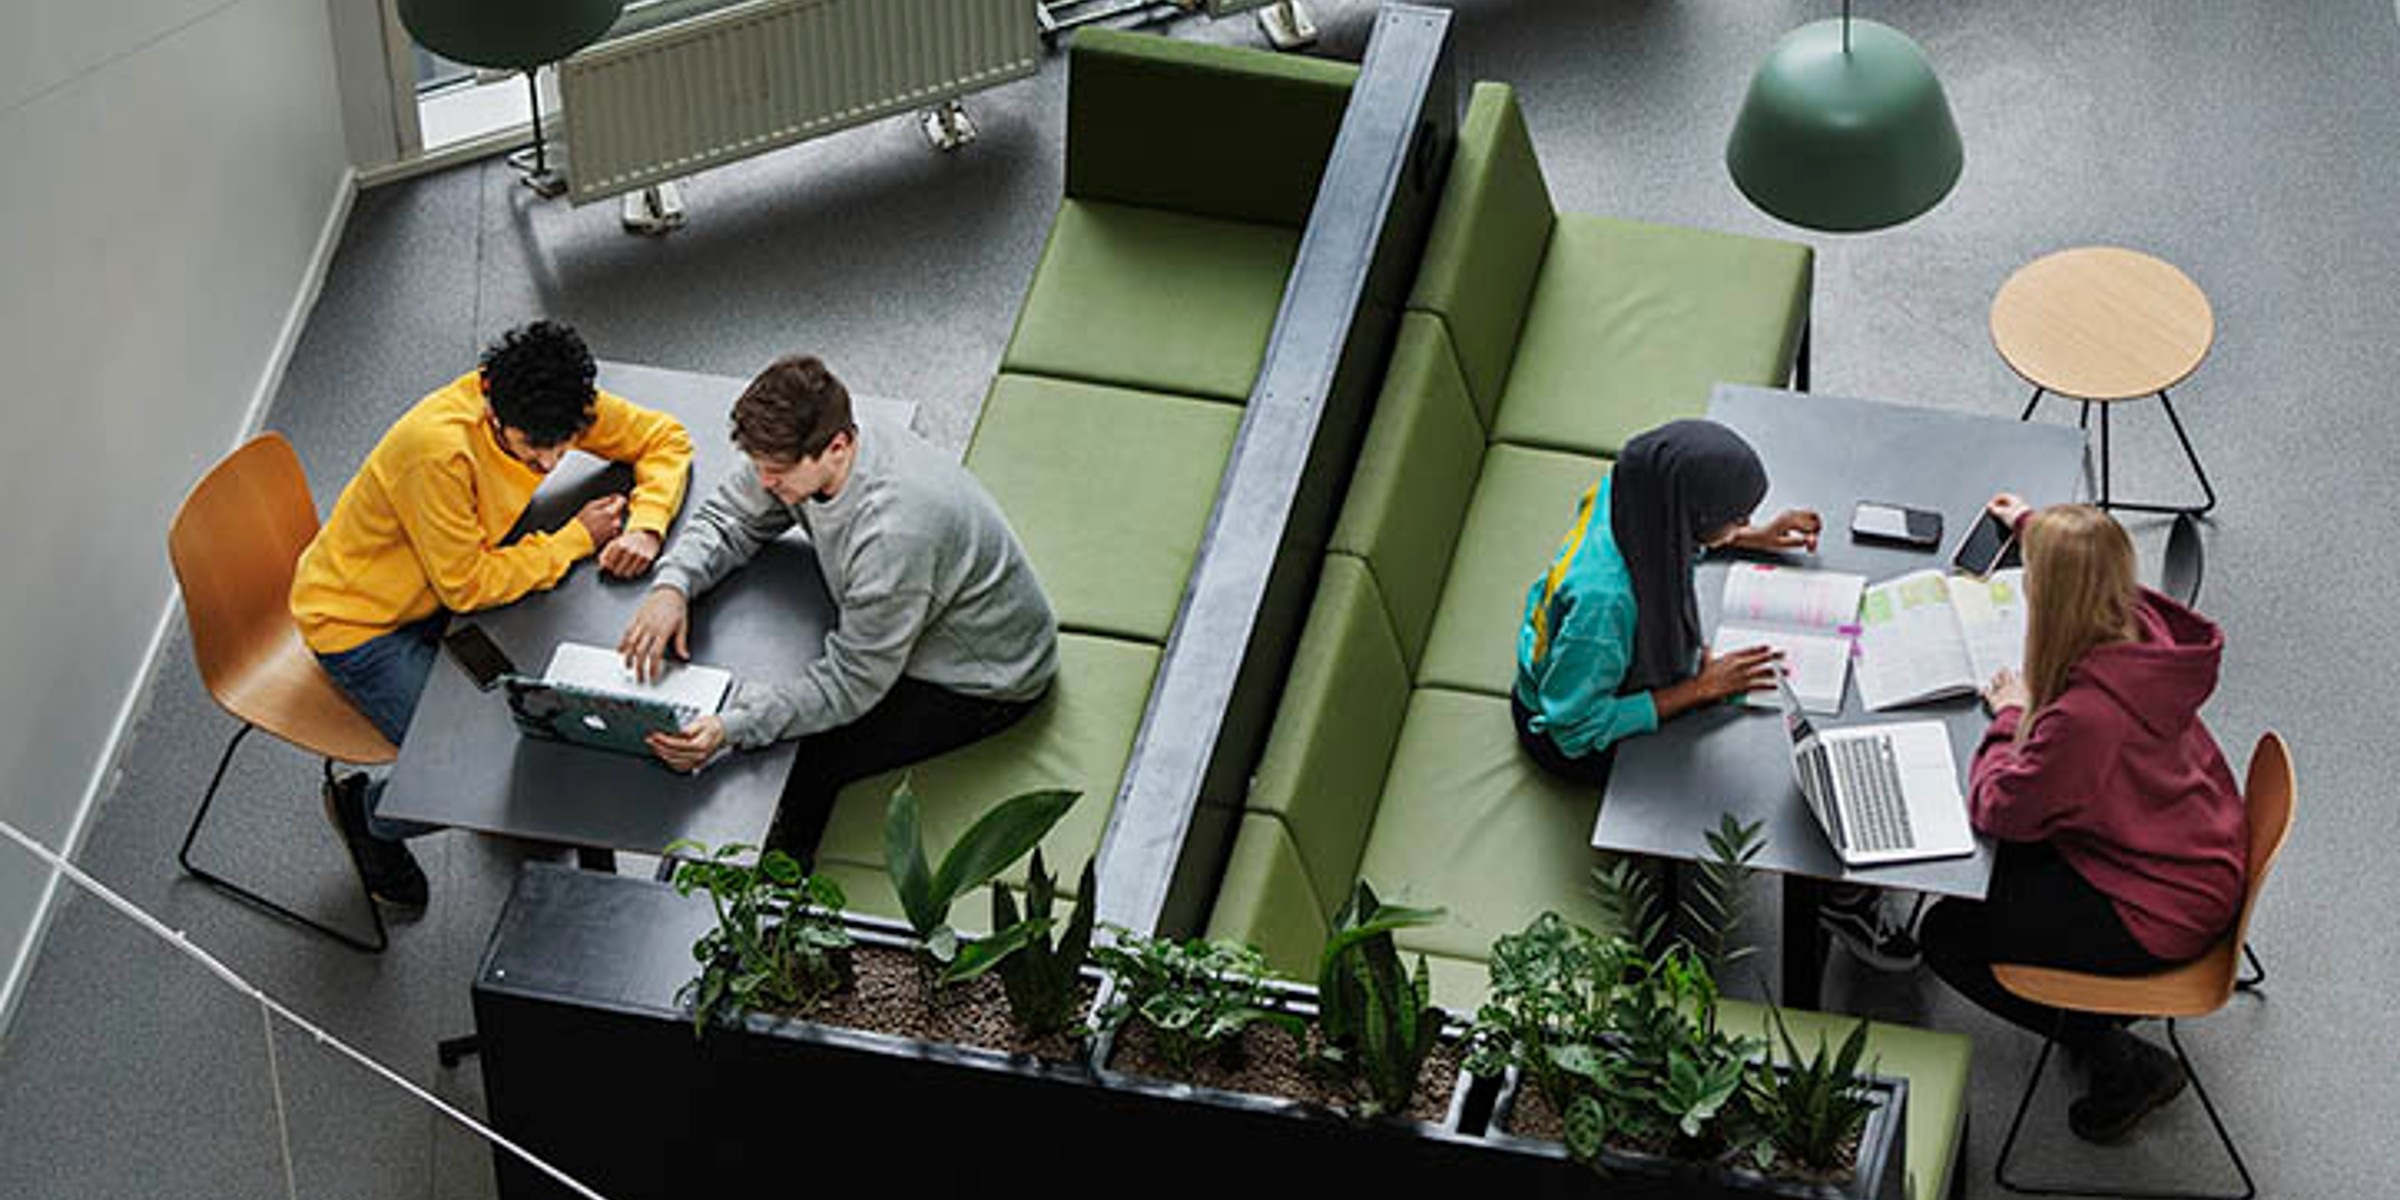 Four students, viewed from above, sitting on sofas and looking at PCs together.